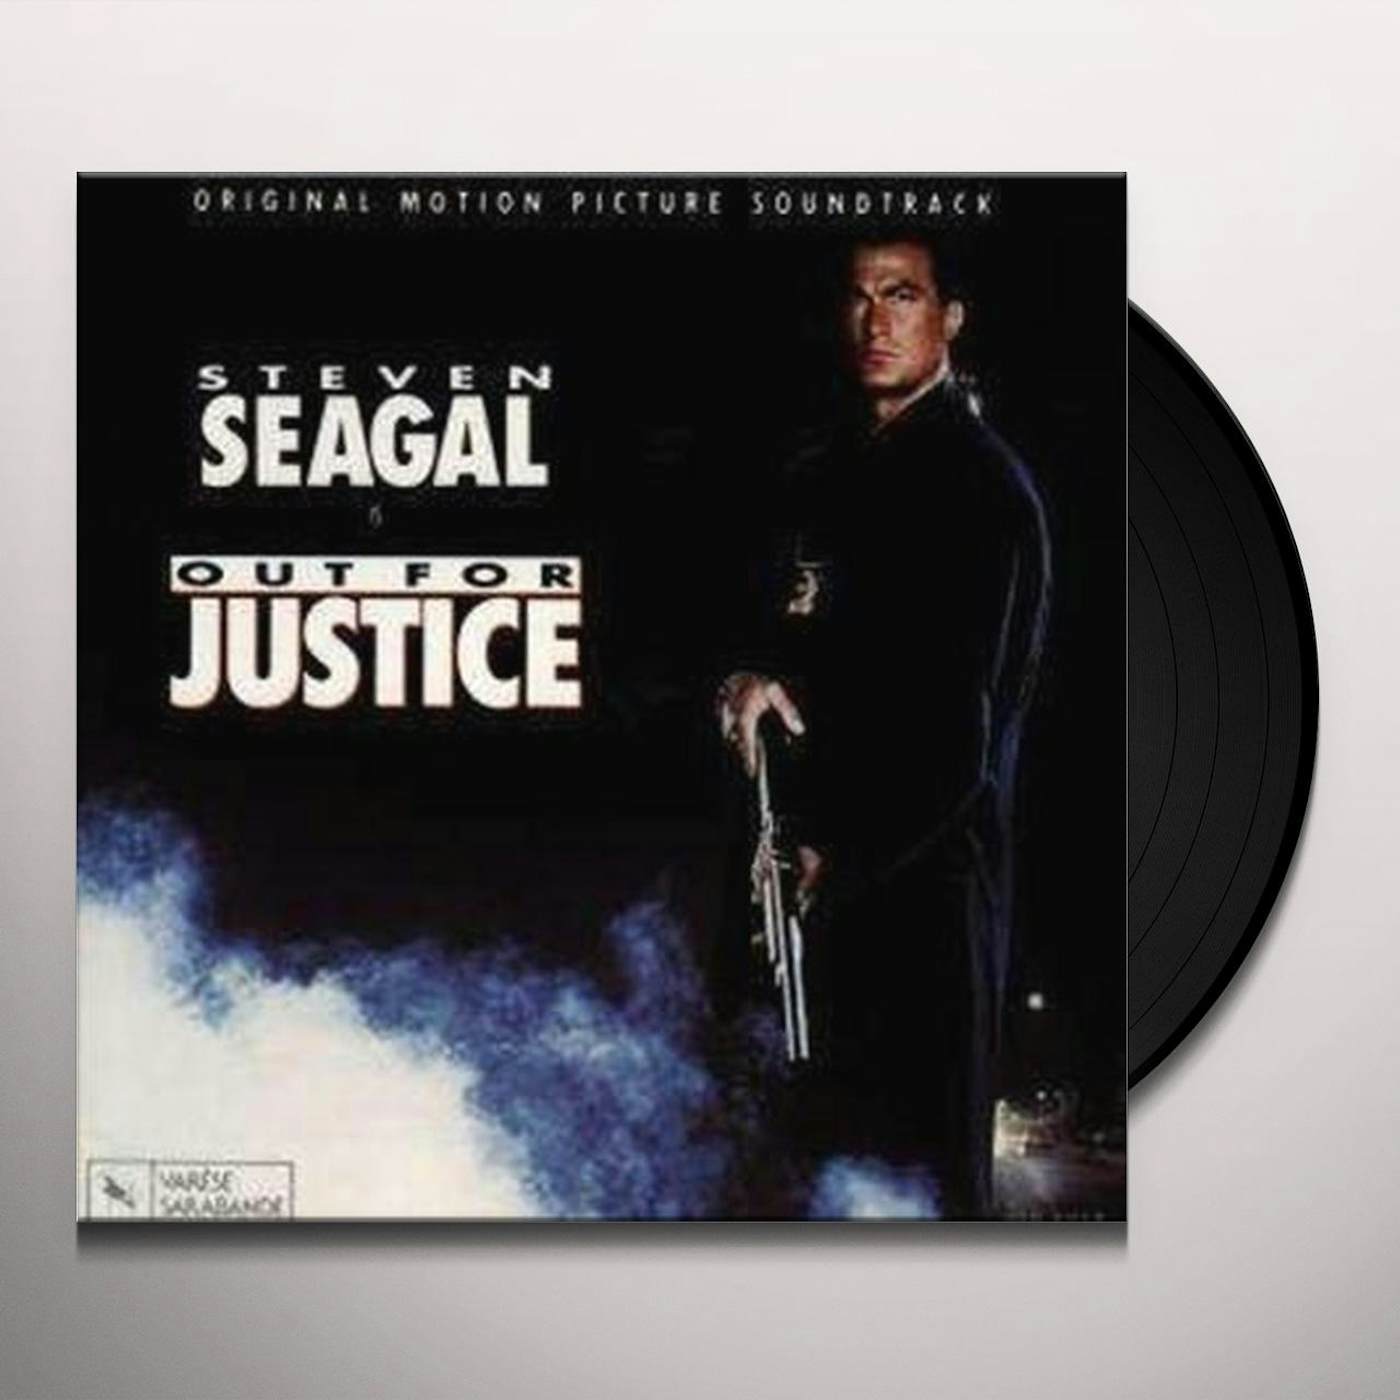 OUT FOR JUSTICE / O.S.T. Vinyl Record